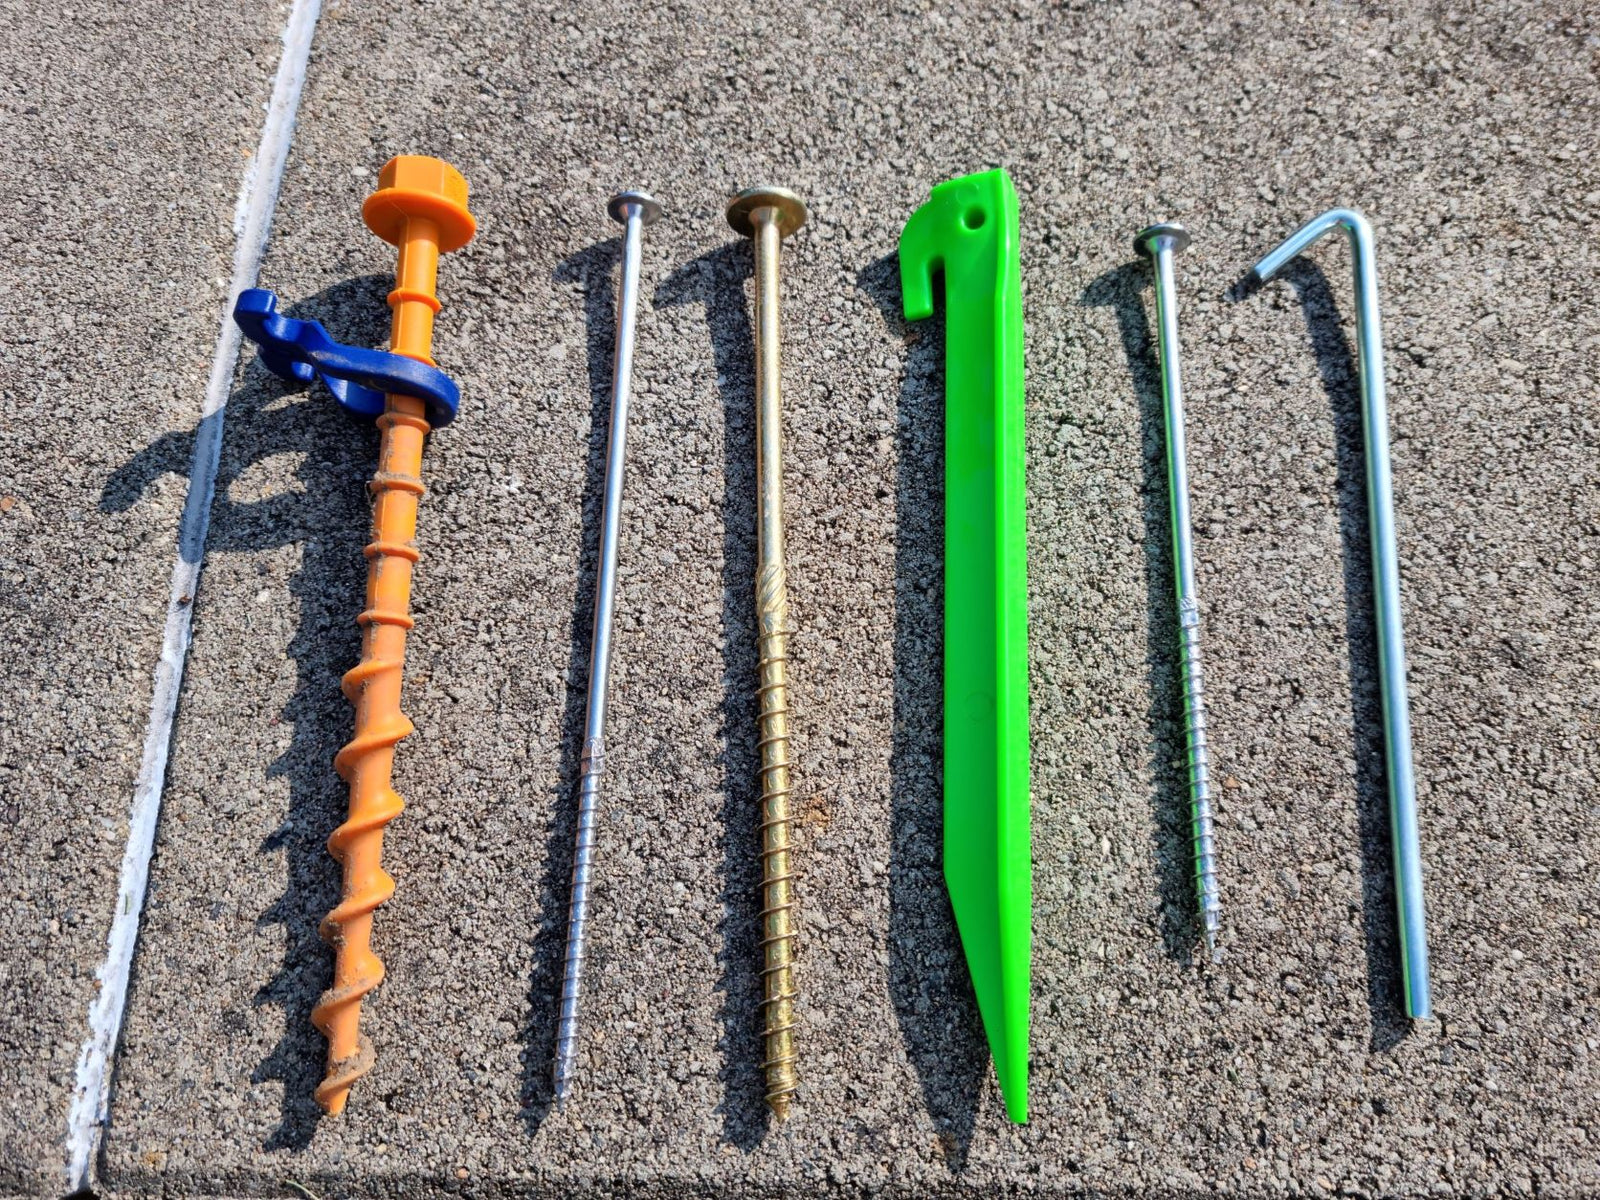 Batten/Coach screws, common tent pegs or Peggy Pegs?